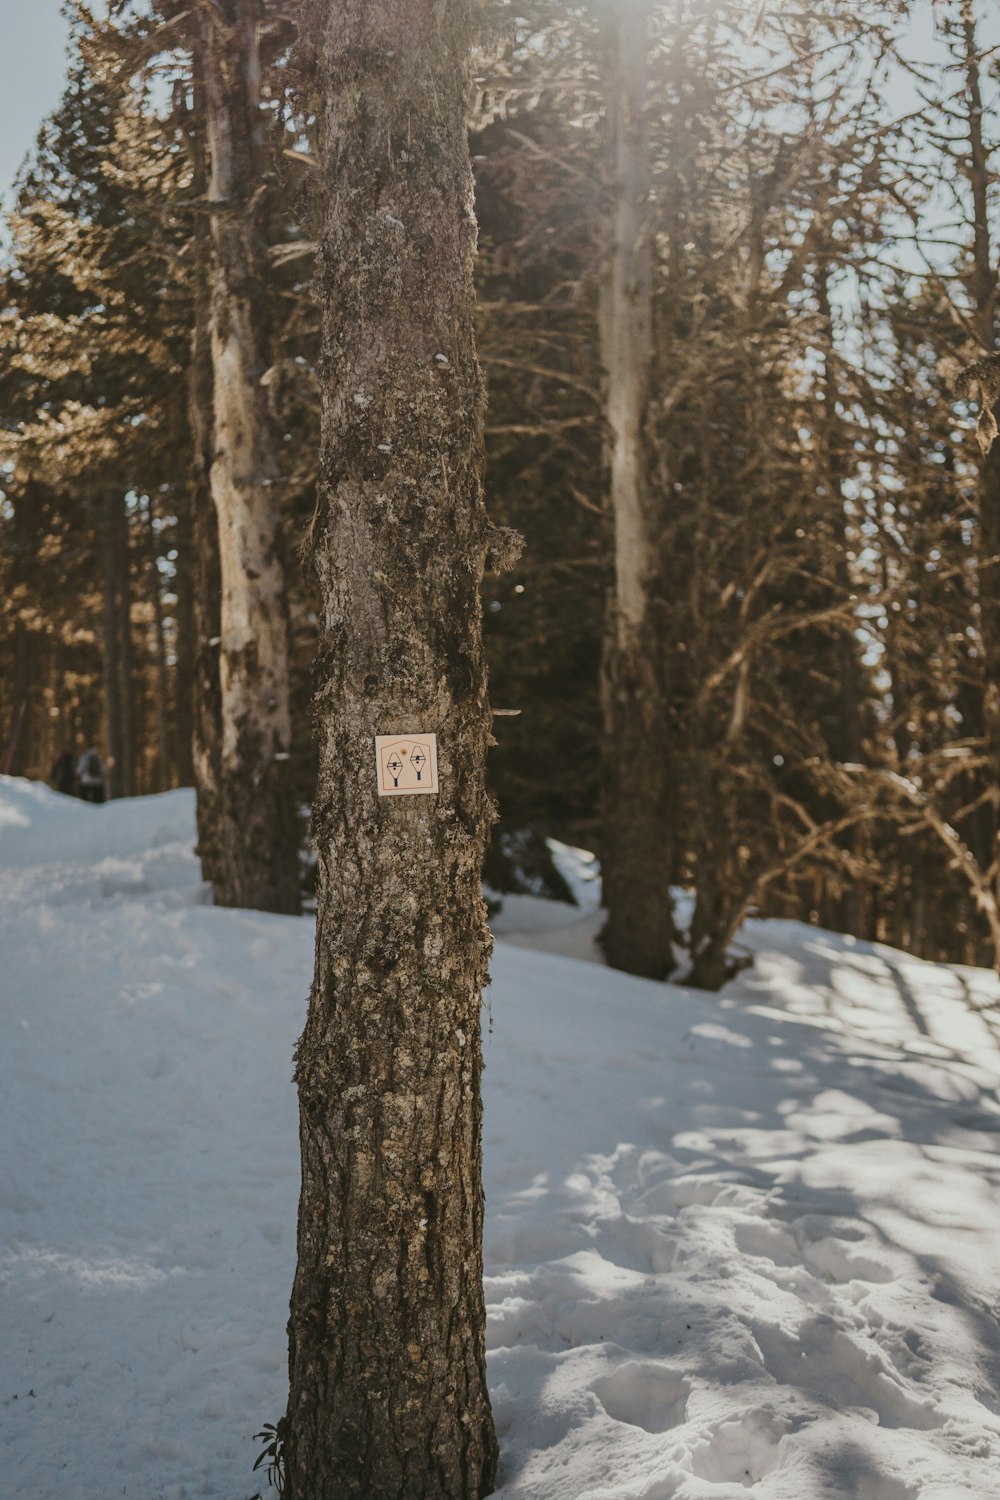 a sign on a tree in the snow